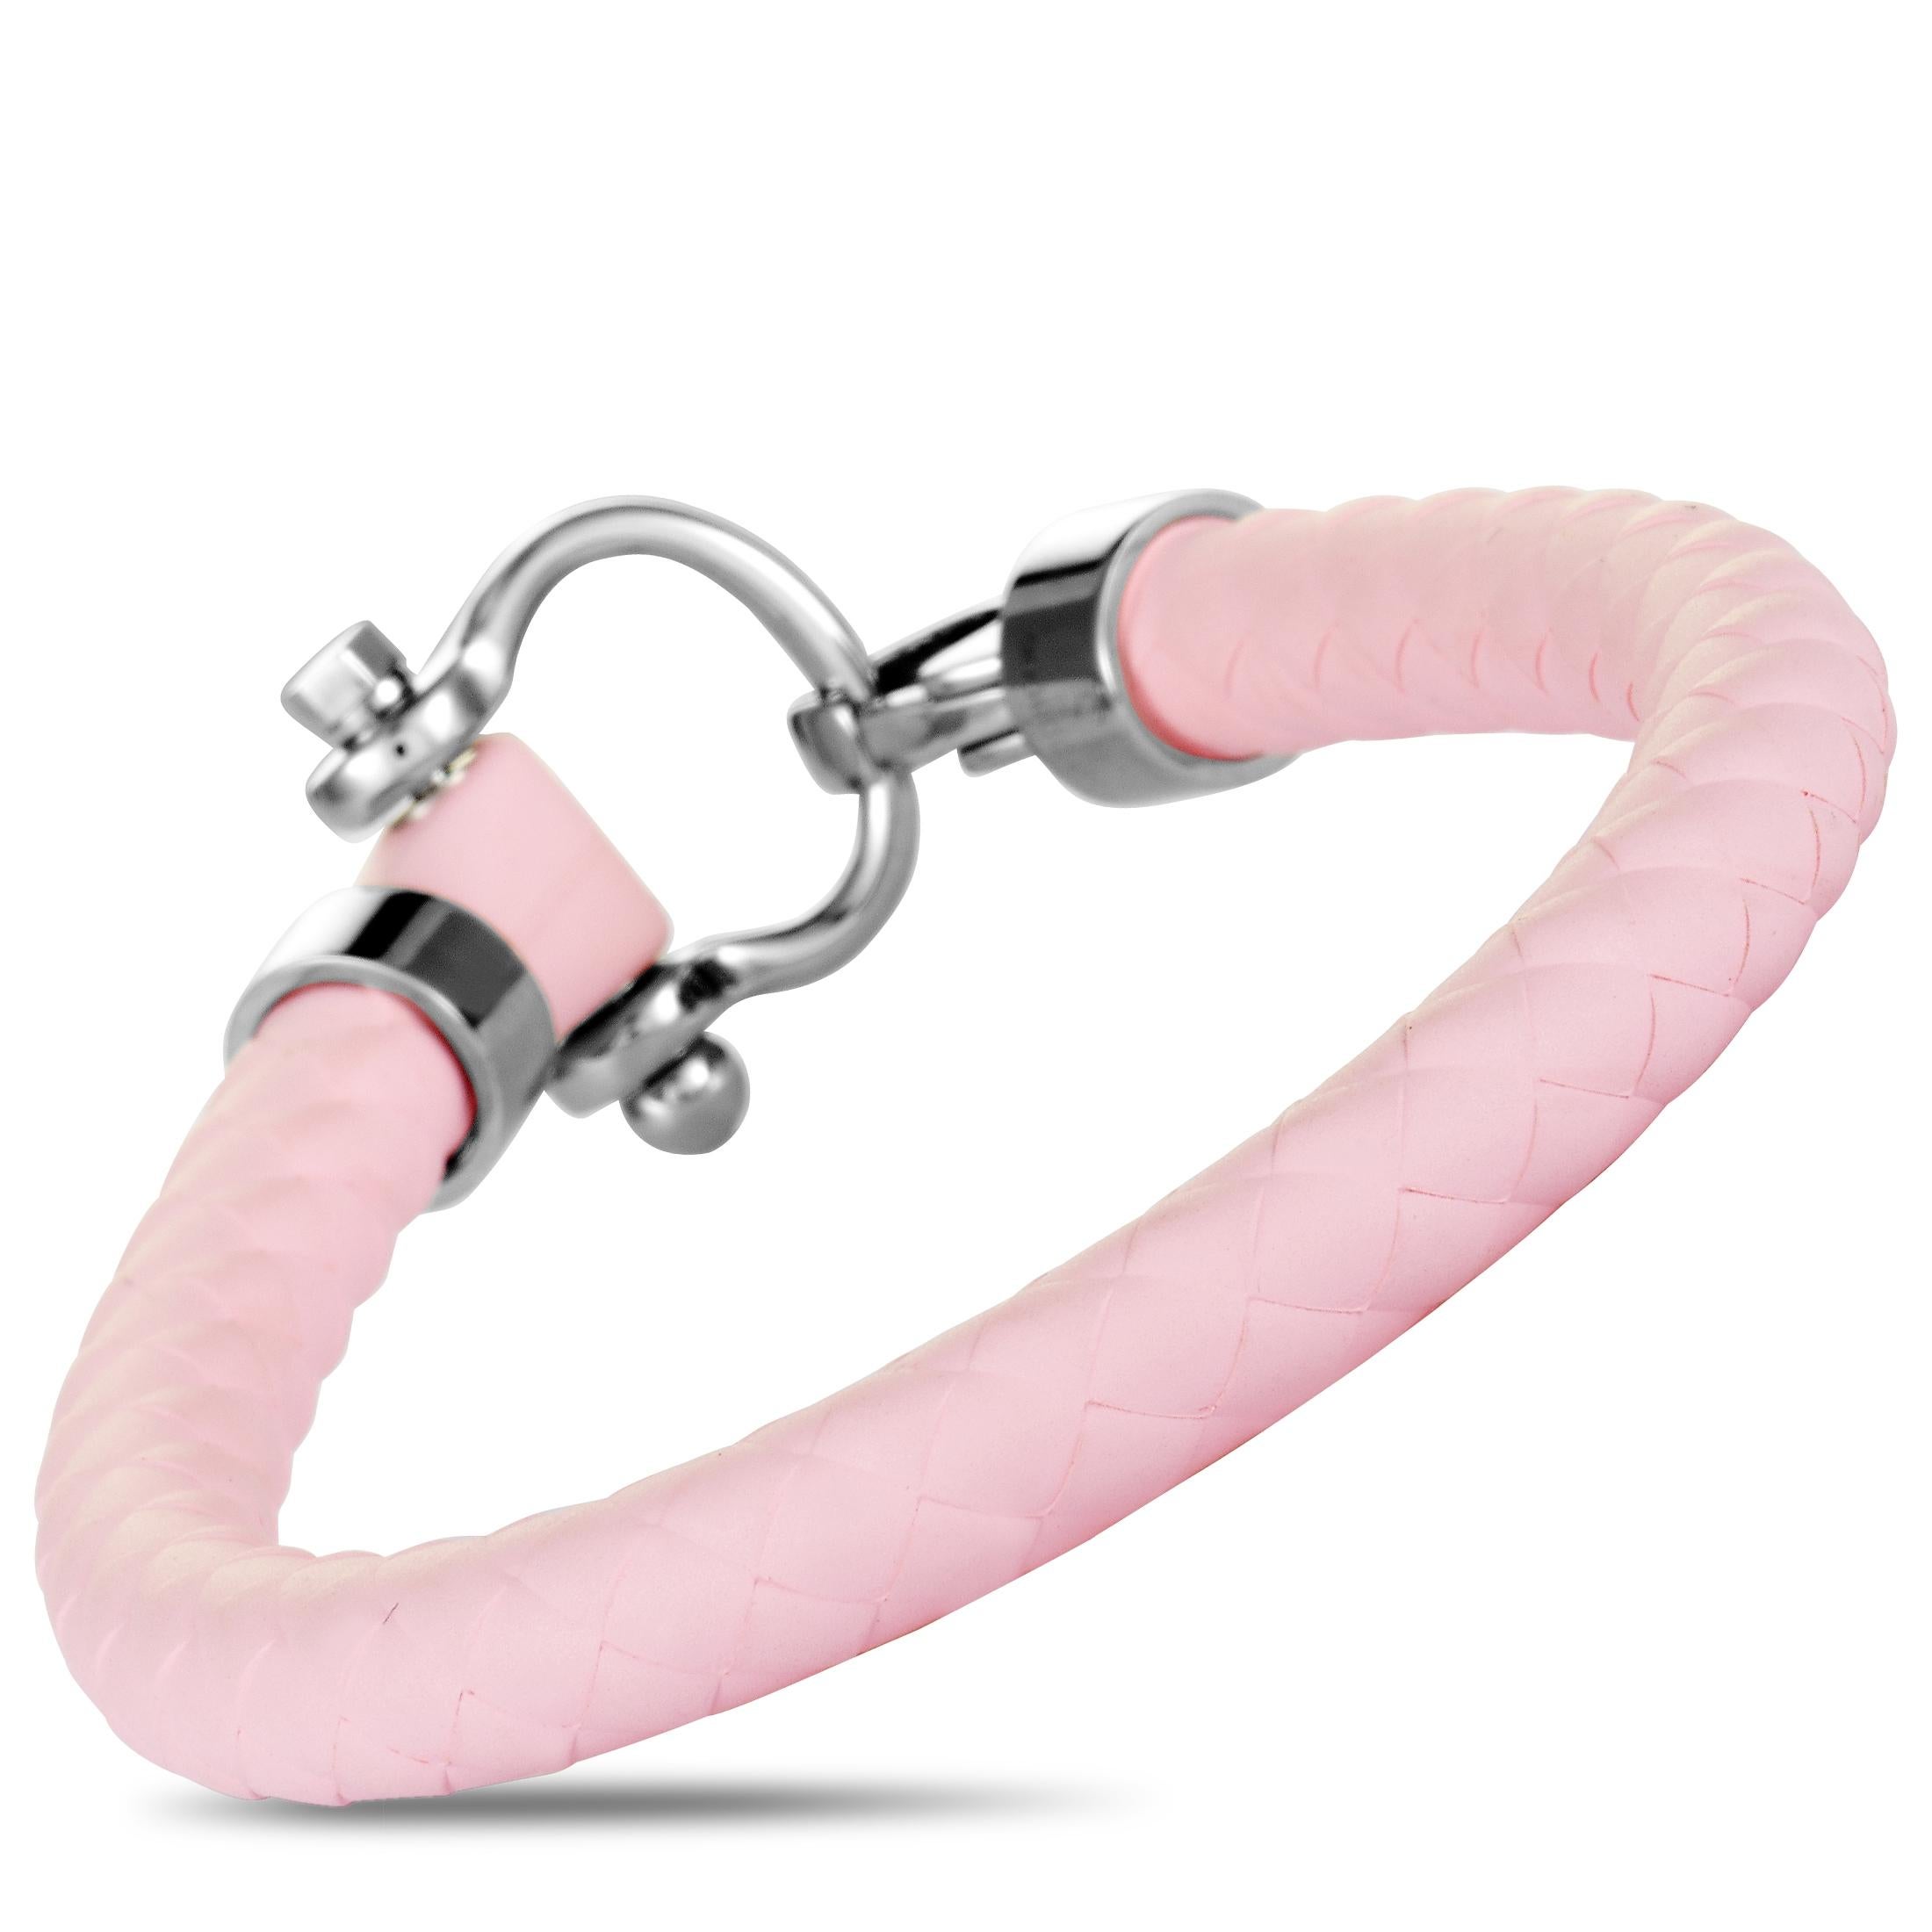 The Omega “Aqua Sailing” bracelet is made out of stainless steel and pink rubber and weighs 26.8 grams. It measures 8.00” in length and features lobster claw closure.
 
 This bracelet is offered in brand new condition and includes a gift box.